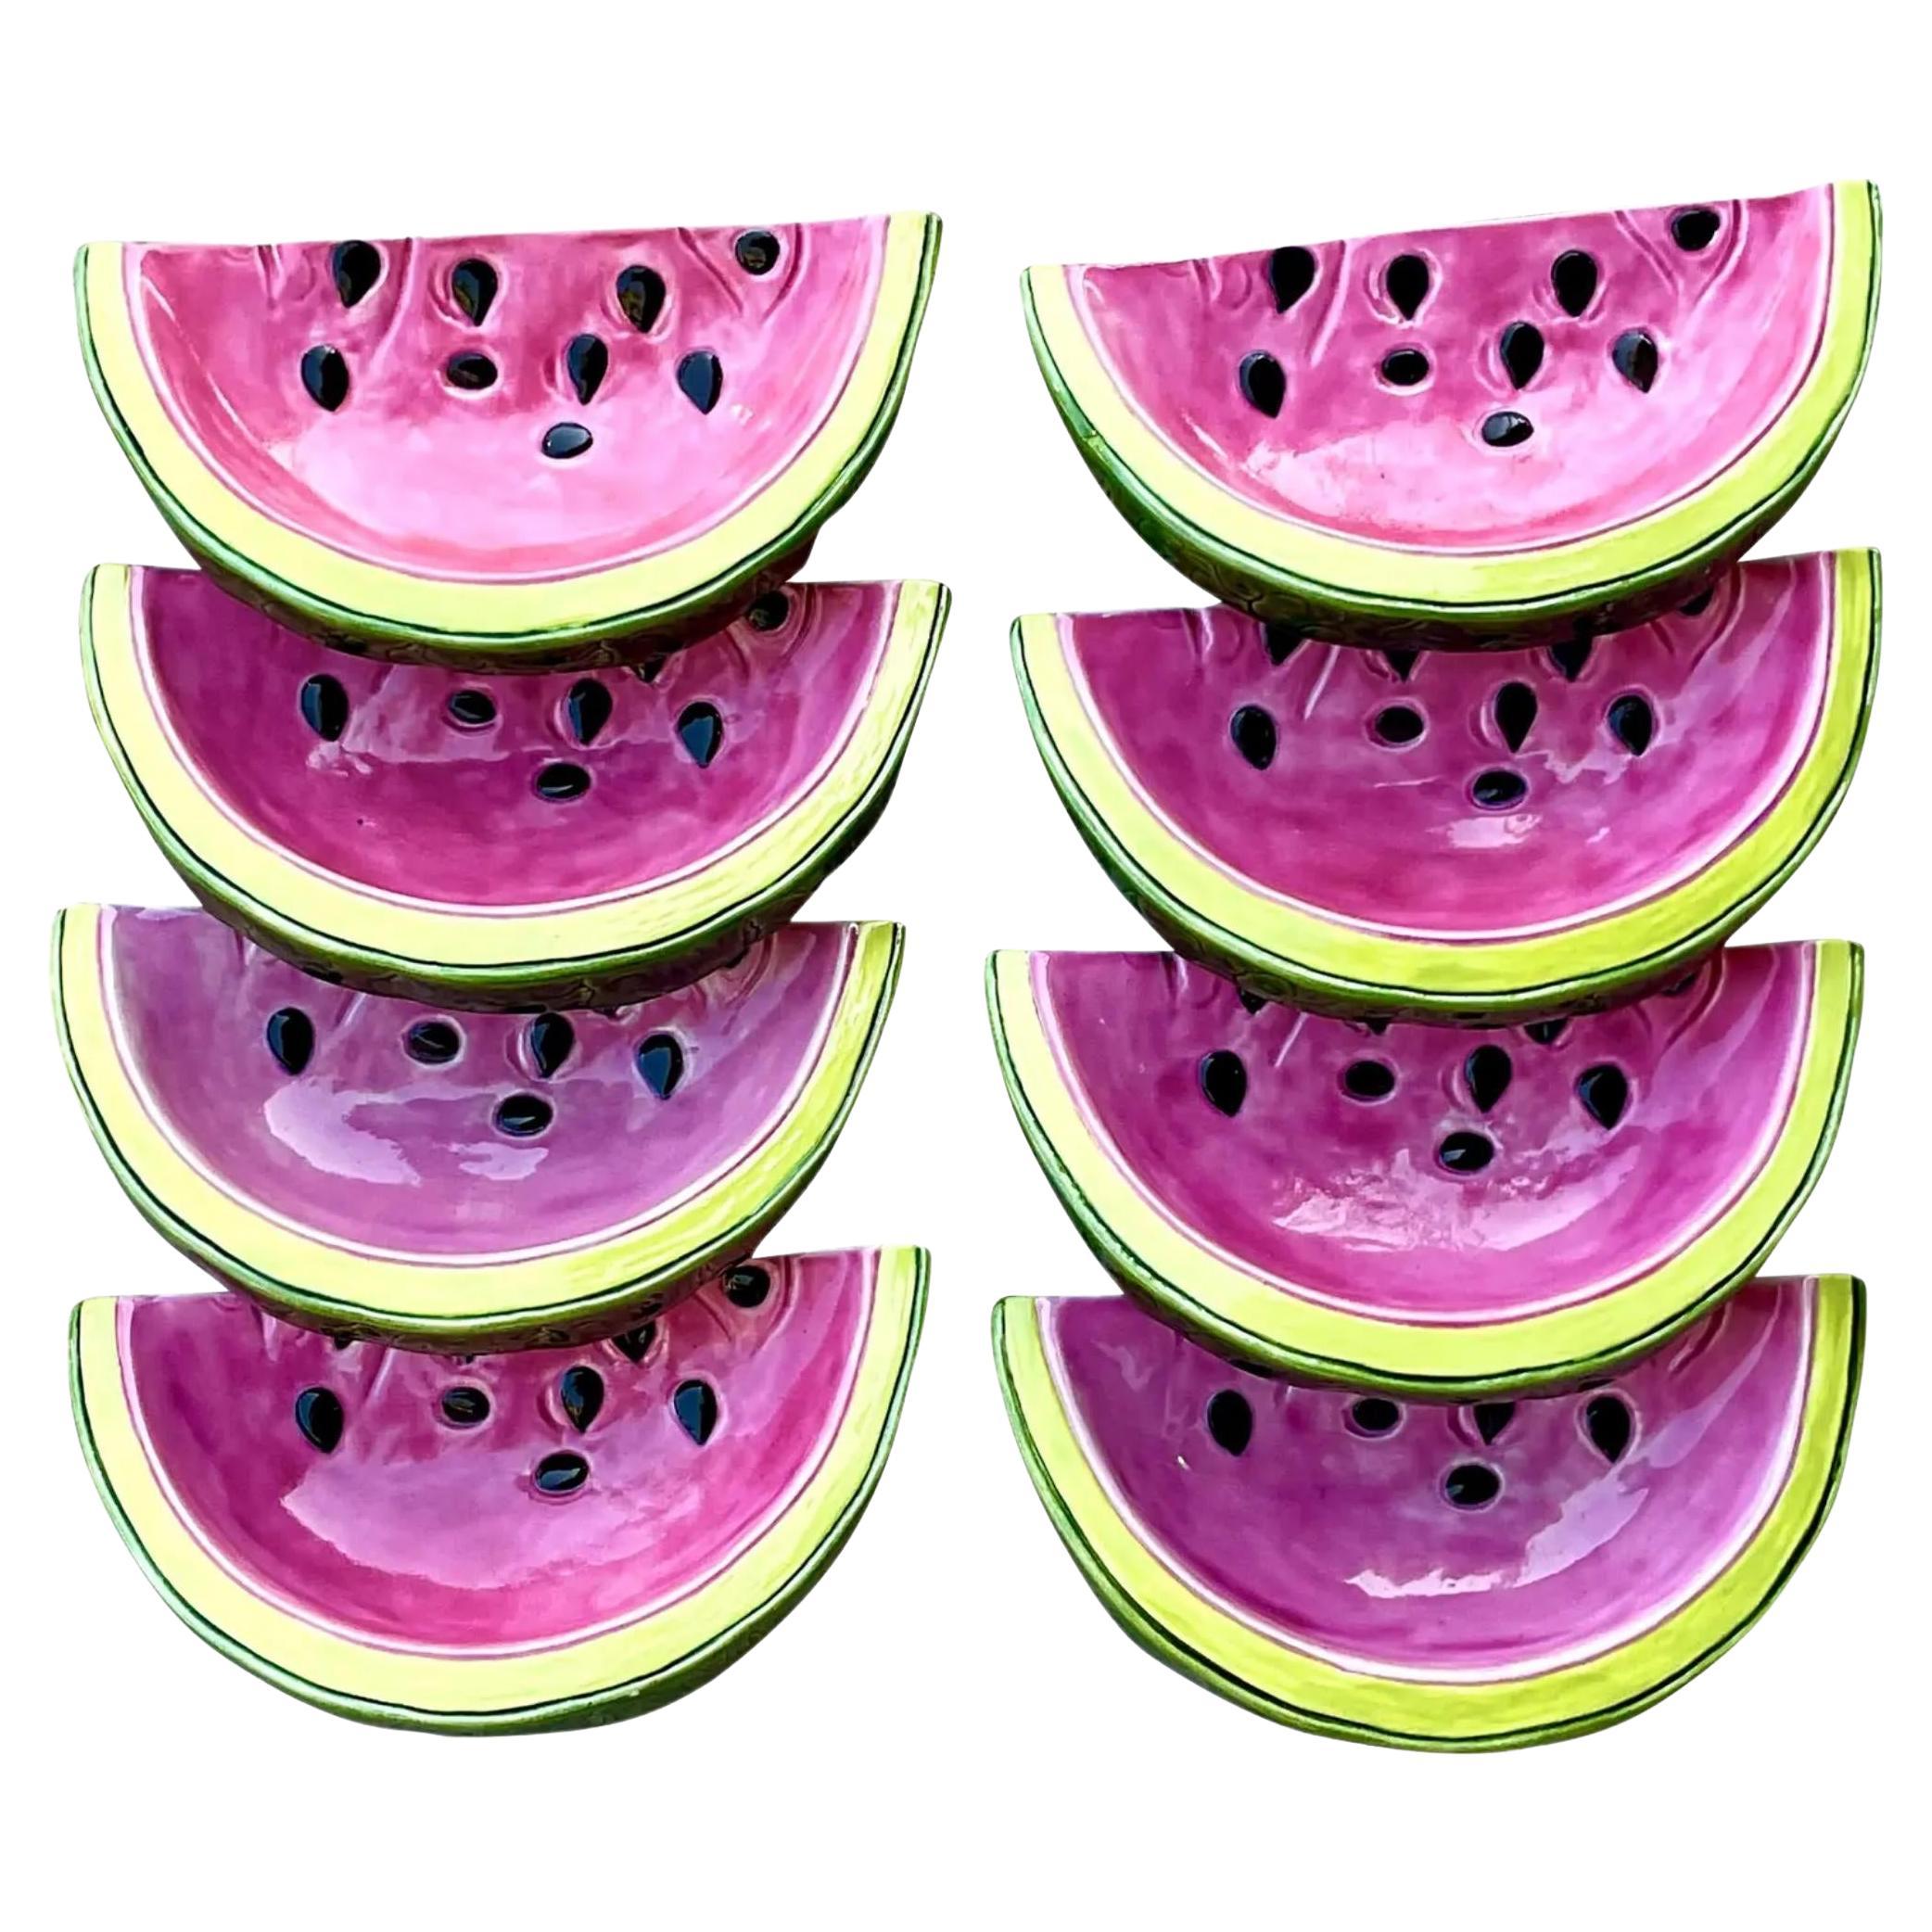 Vintage Boho Hand Painted Watermelon Luncheon Plates - Set of 8 For Sale